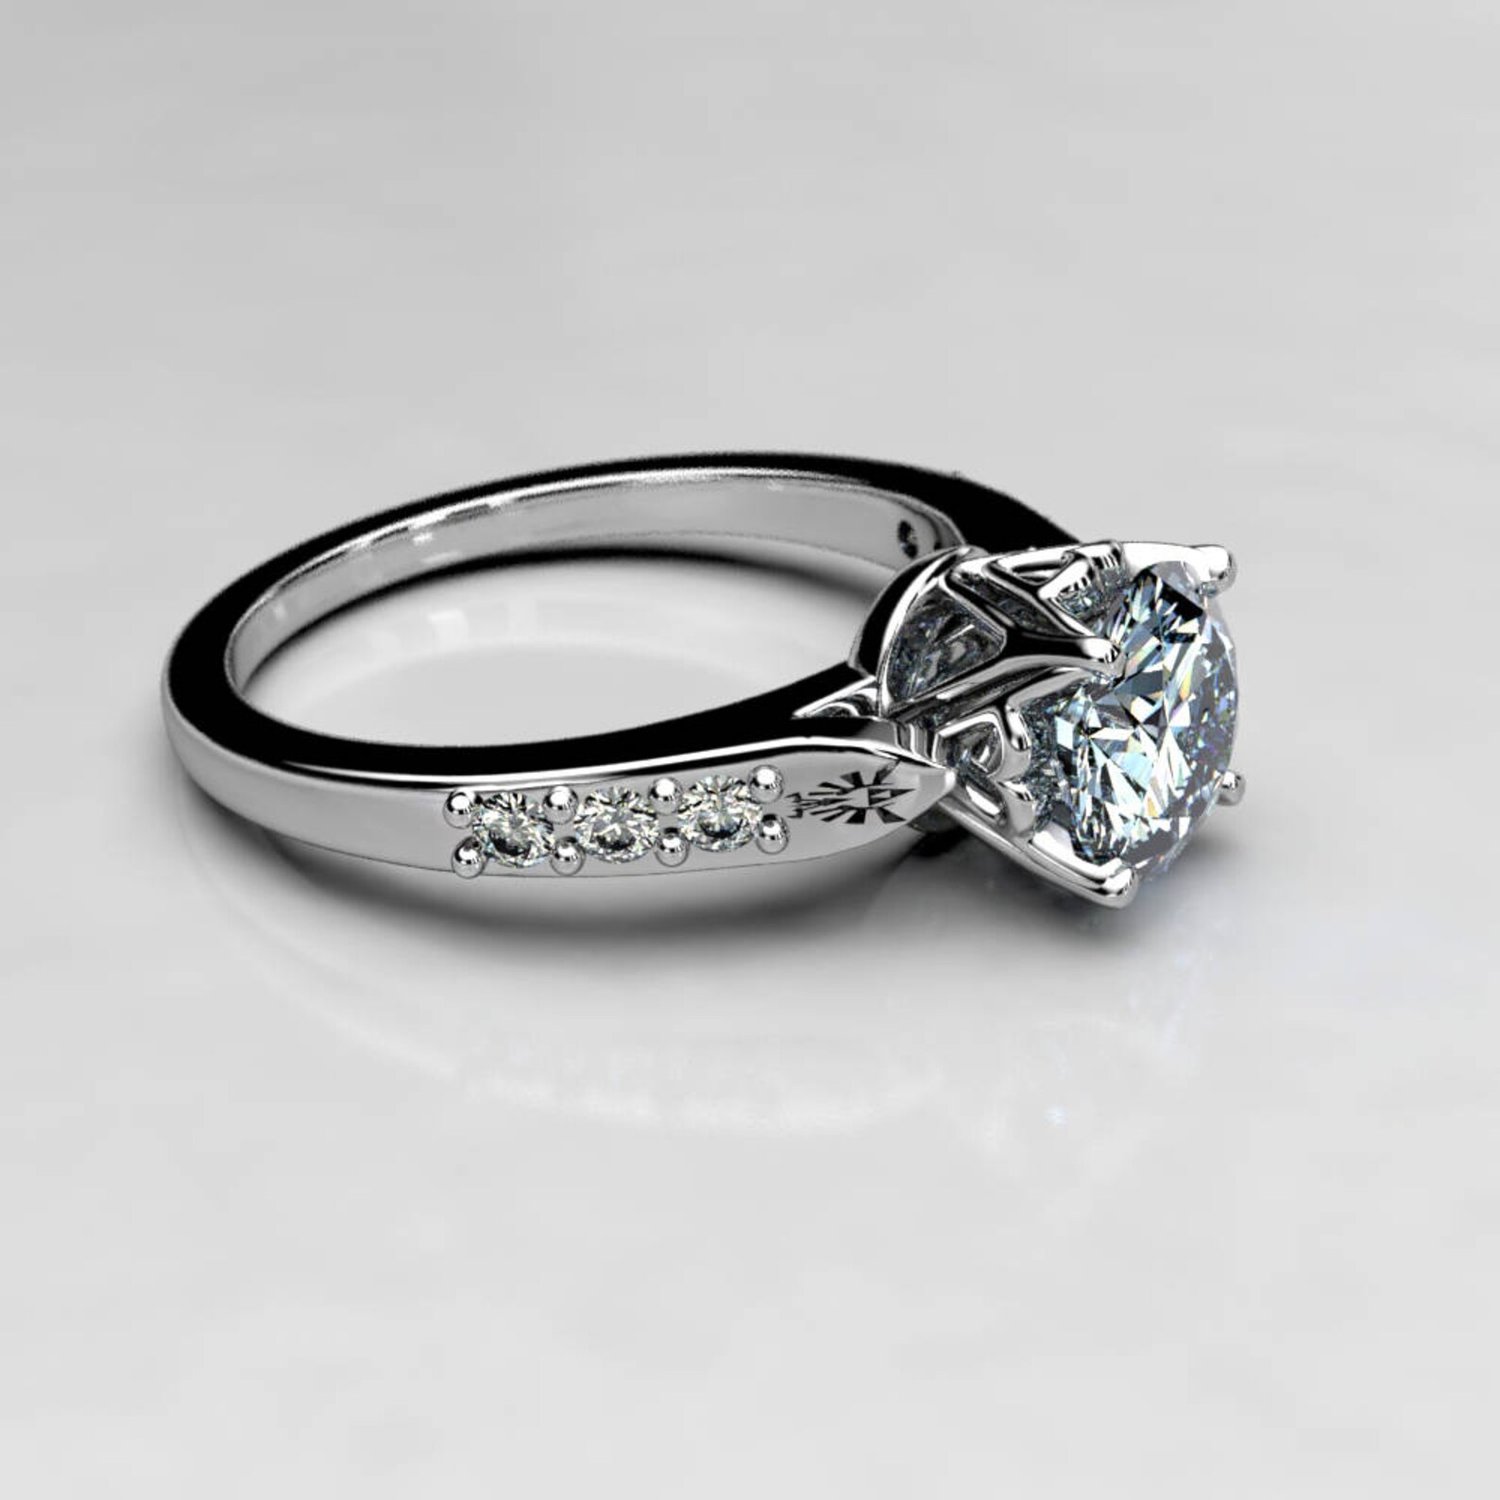 Authenticatie Sluiting Onderdrukker Legend of Zelda Engagement Ring - 1 Carat Moissanite Brilliant Cut in White  Gold Setting — Metal Wendler- Recycled gold and palladium handmade Bridal  and Wedding Bands.